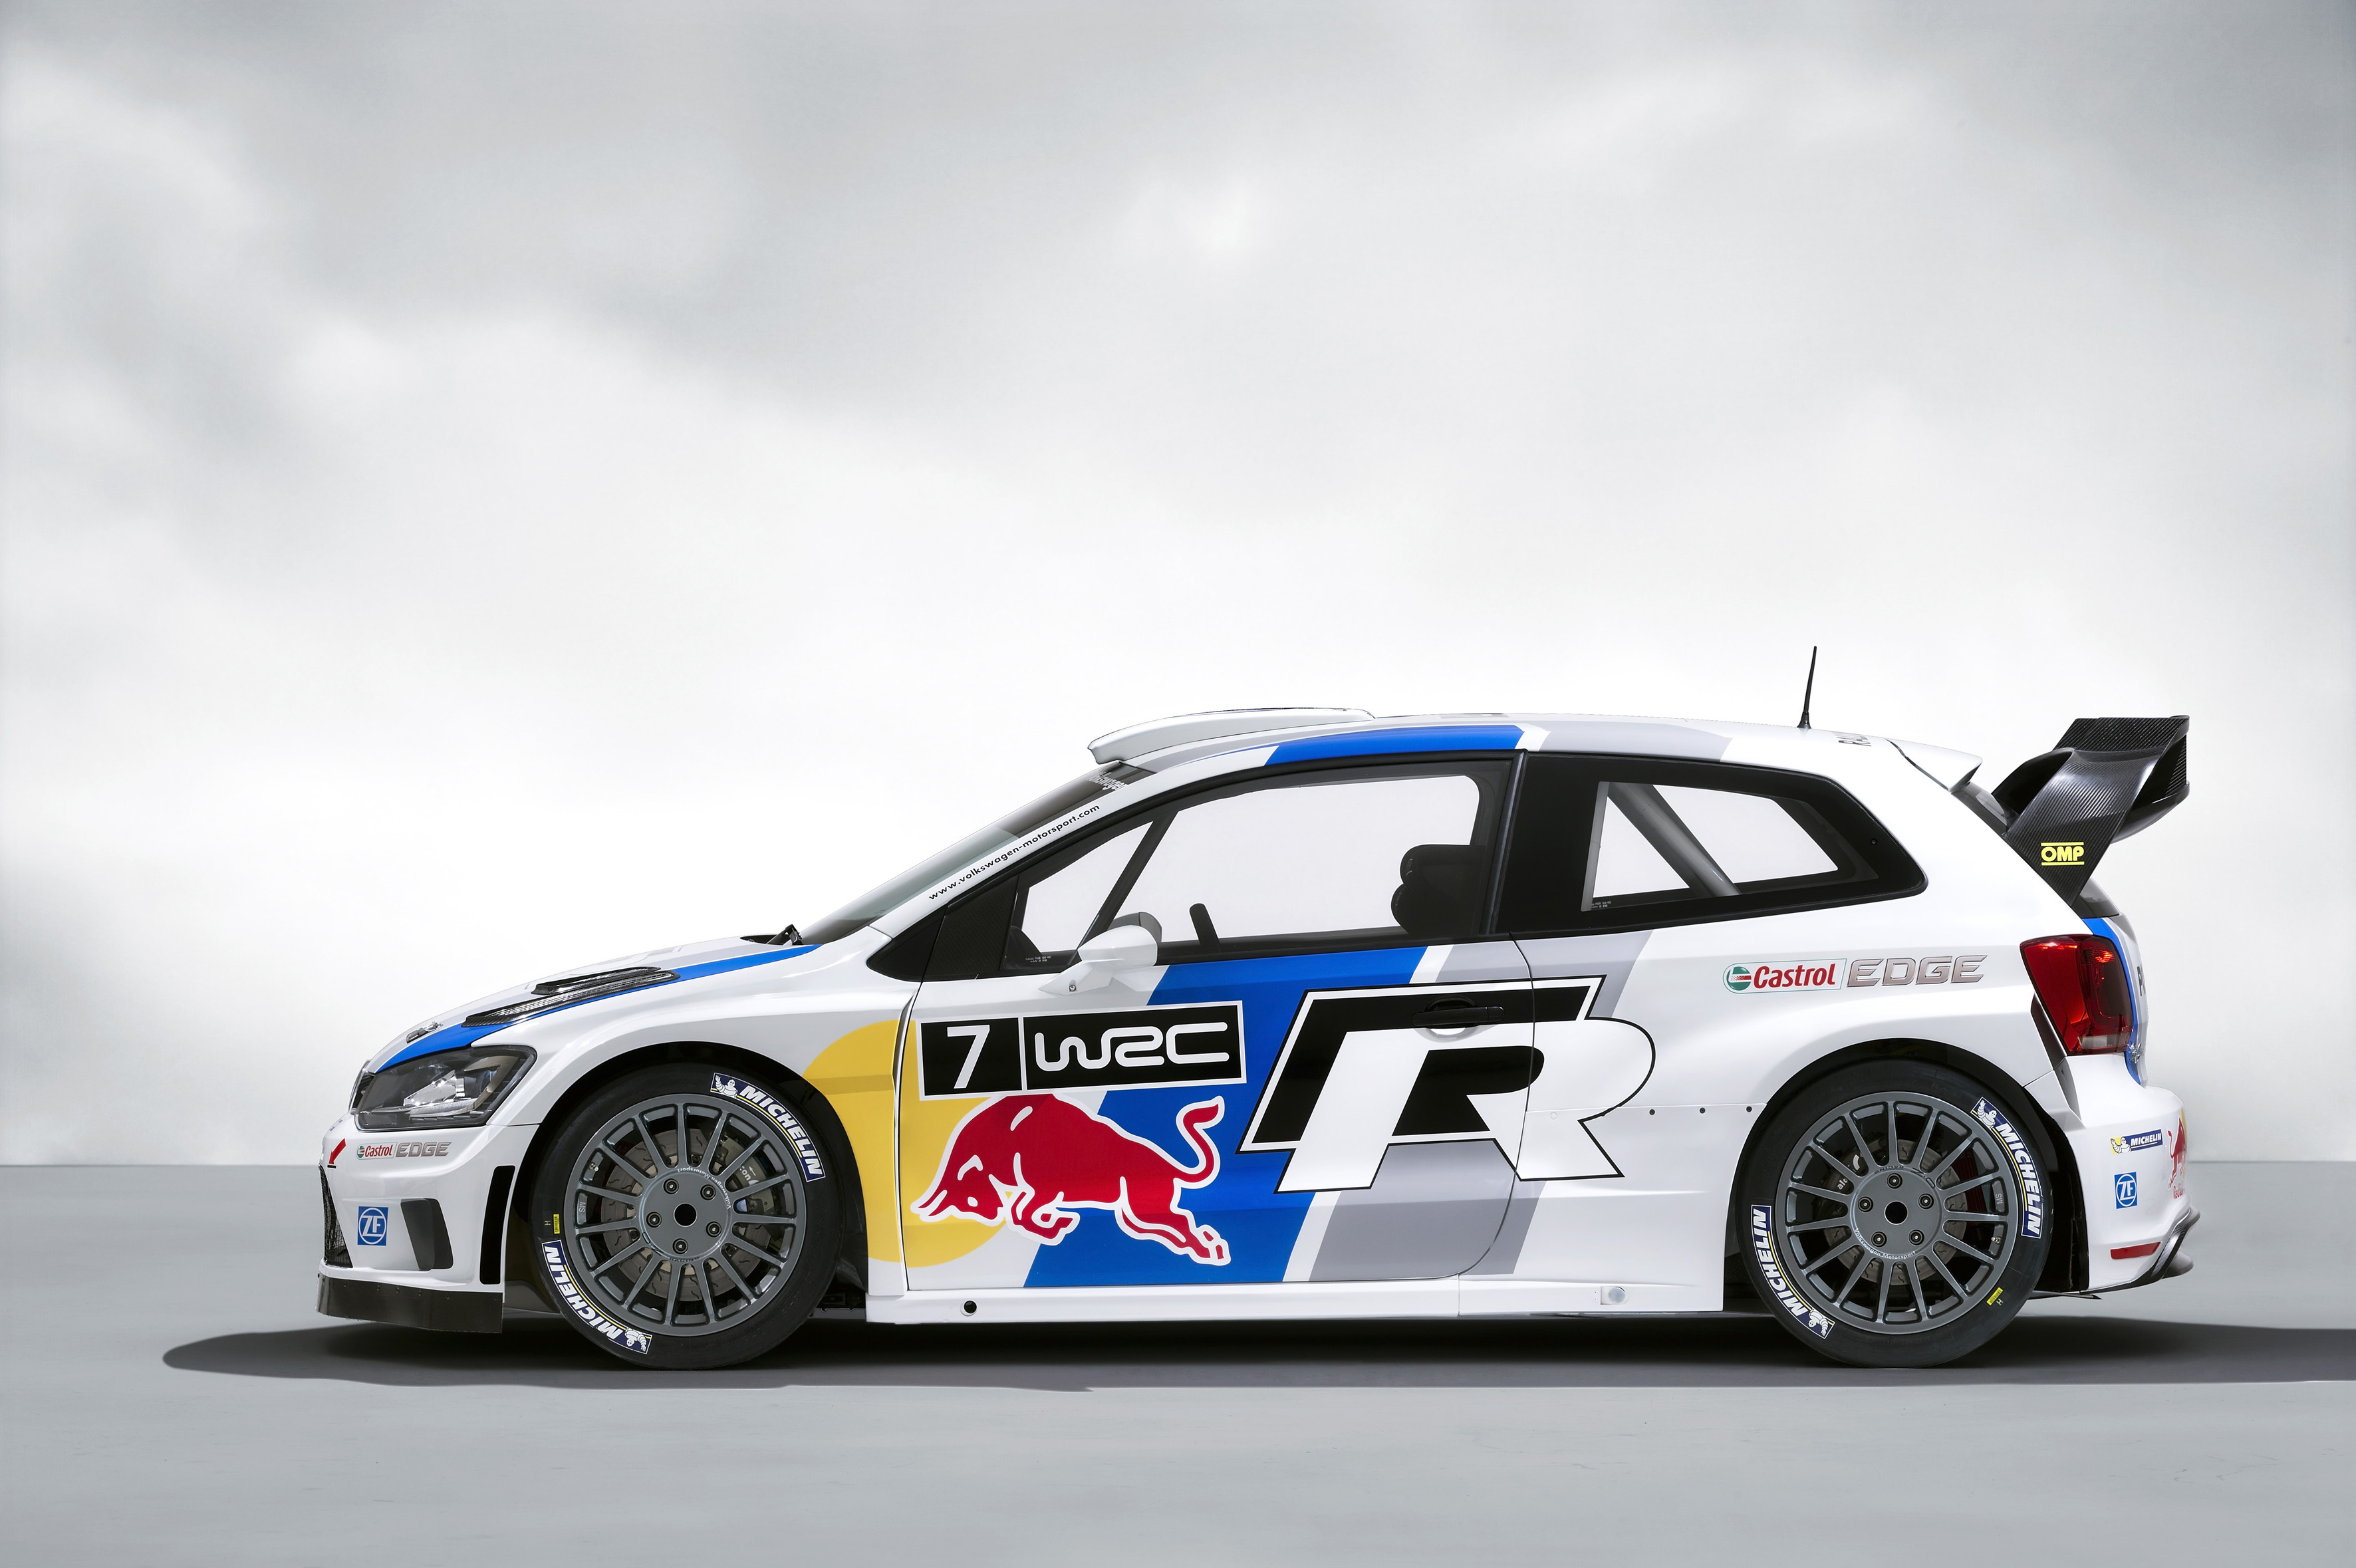 HQ 2013 Volkswagen Polo Wrc Wallpapers | File 880.9Kb